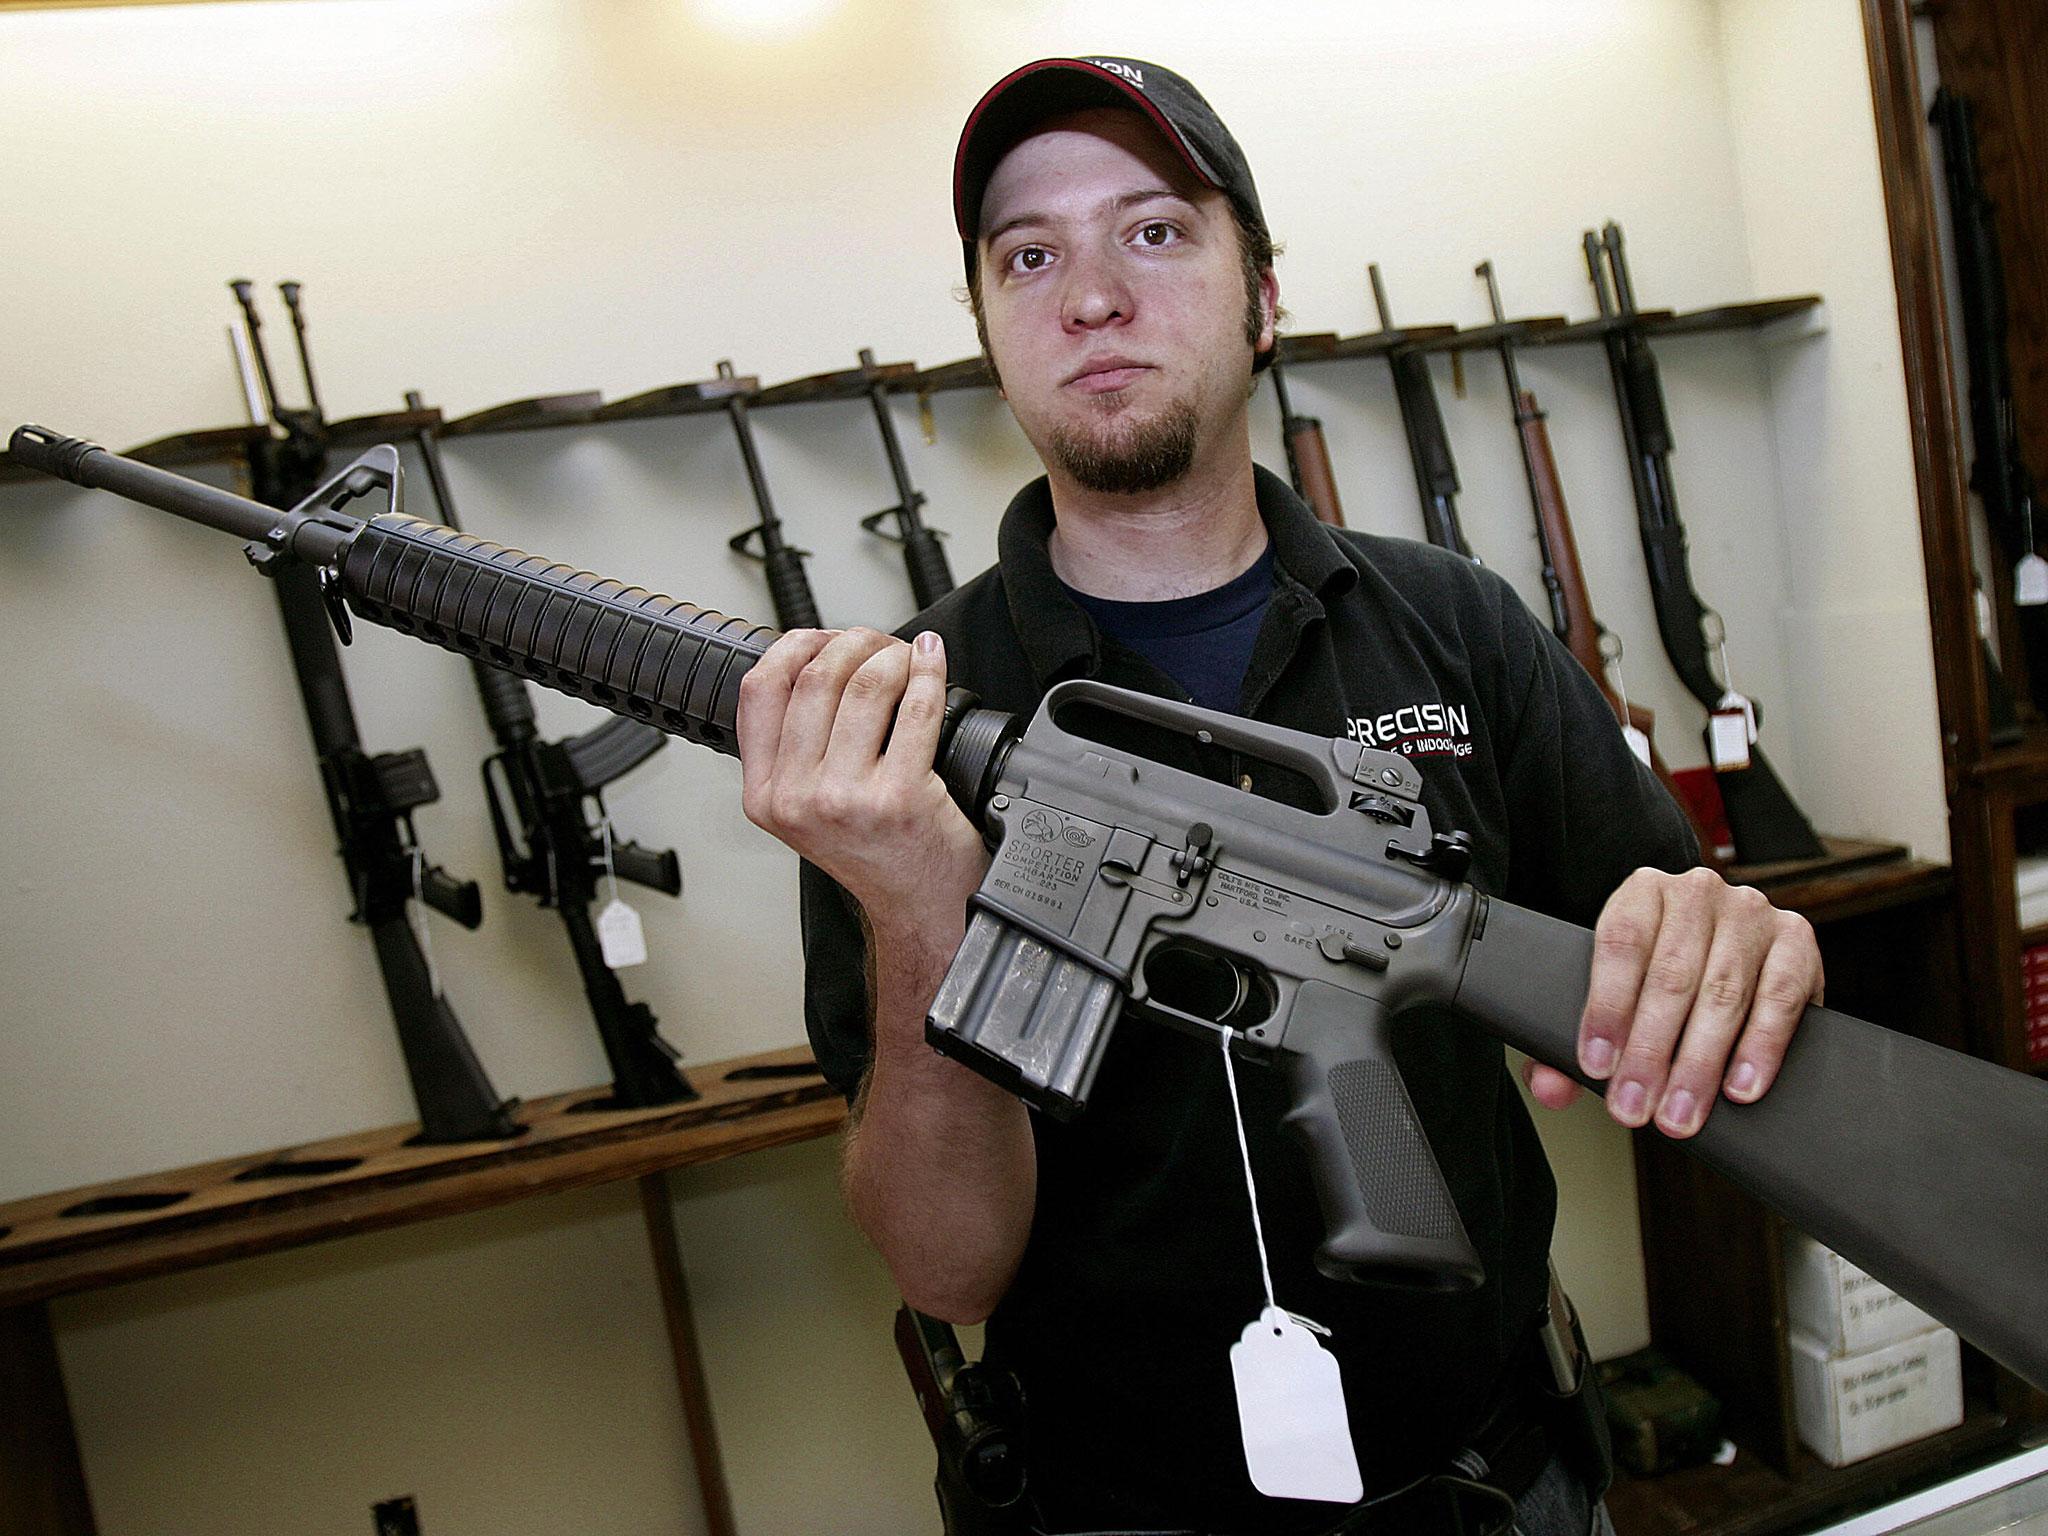 Maryland banned the AR-15 and other military-style rifles and shotguns and limited magazine capacity to 10 rounds in response to the massacre in Newtown, Connecticut, in 2012